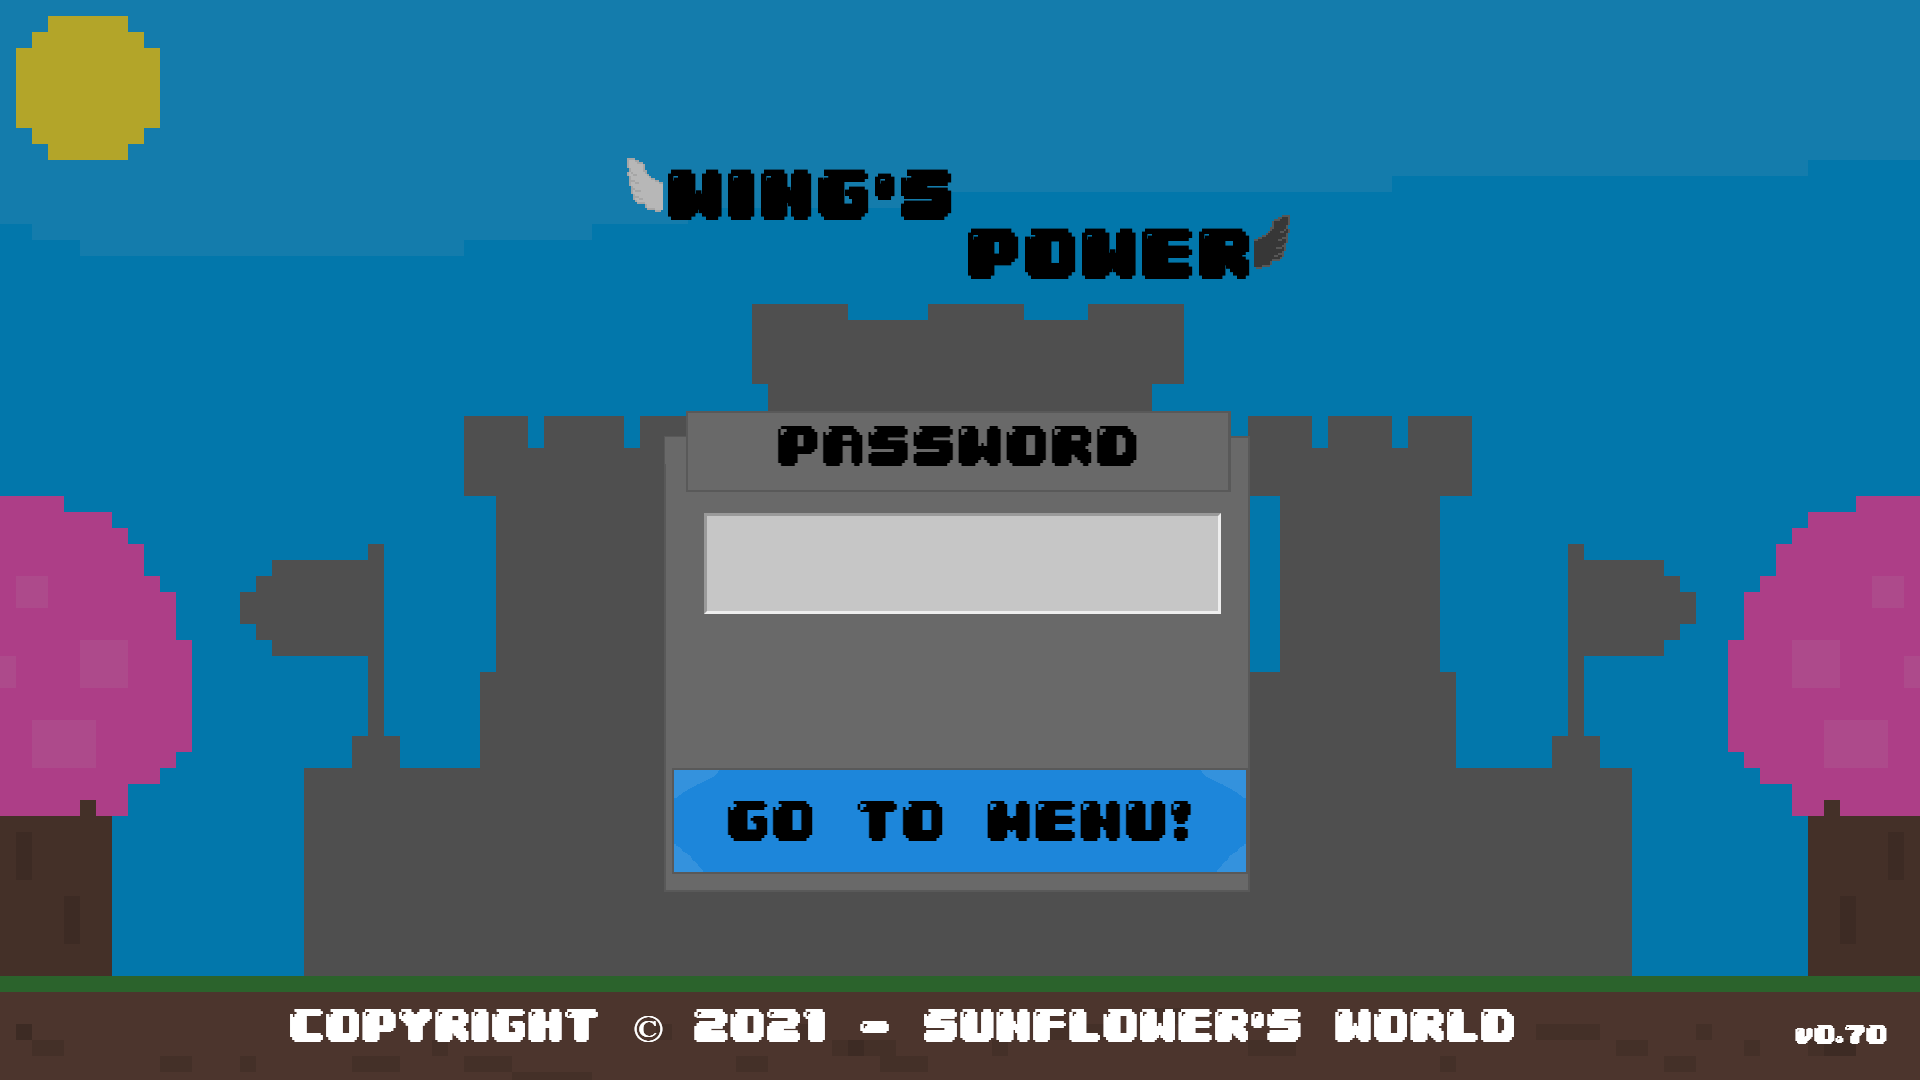 wings-power-password-18.02.2021.png